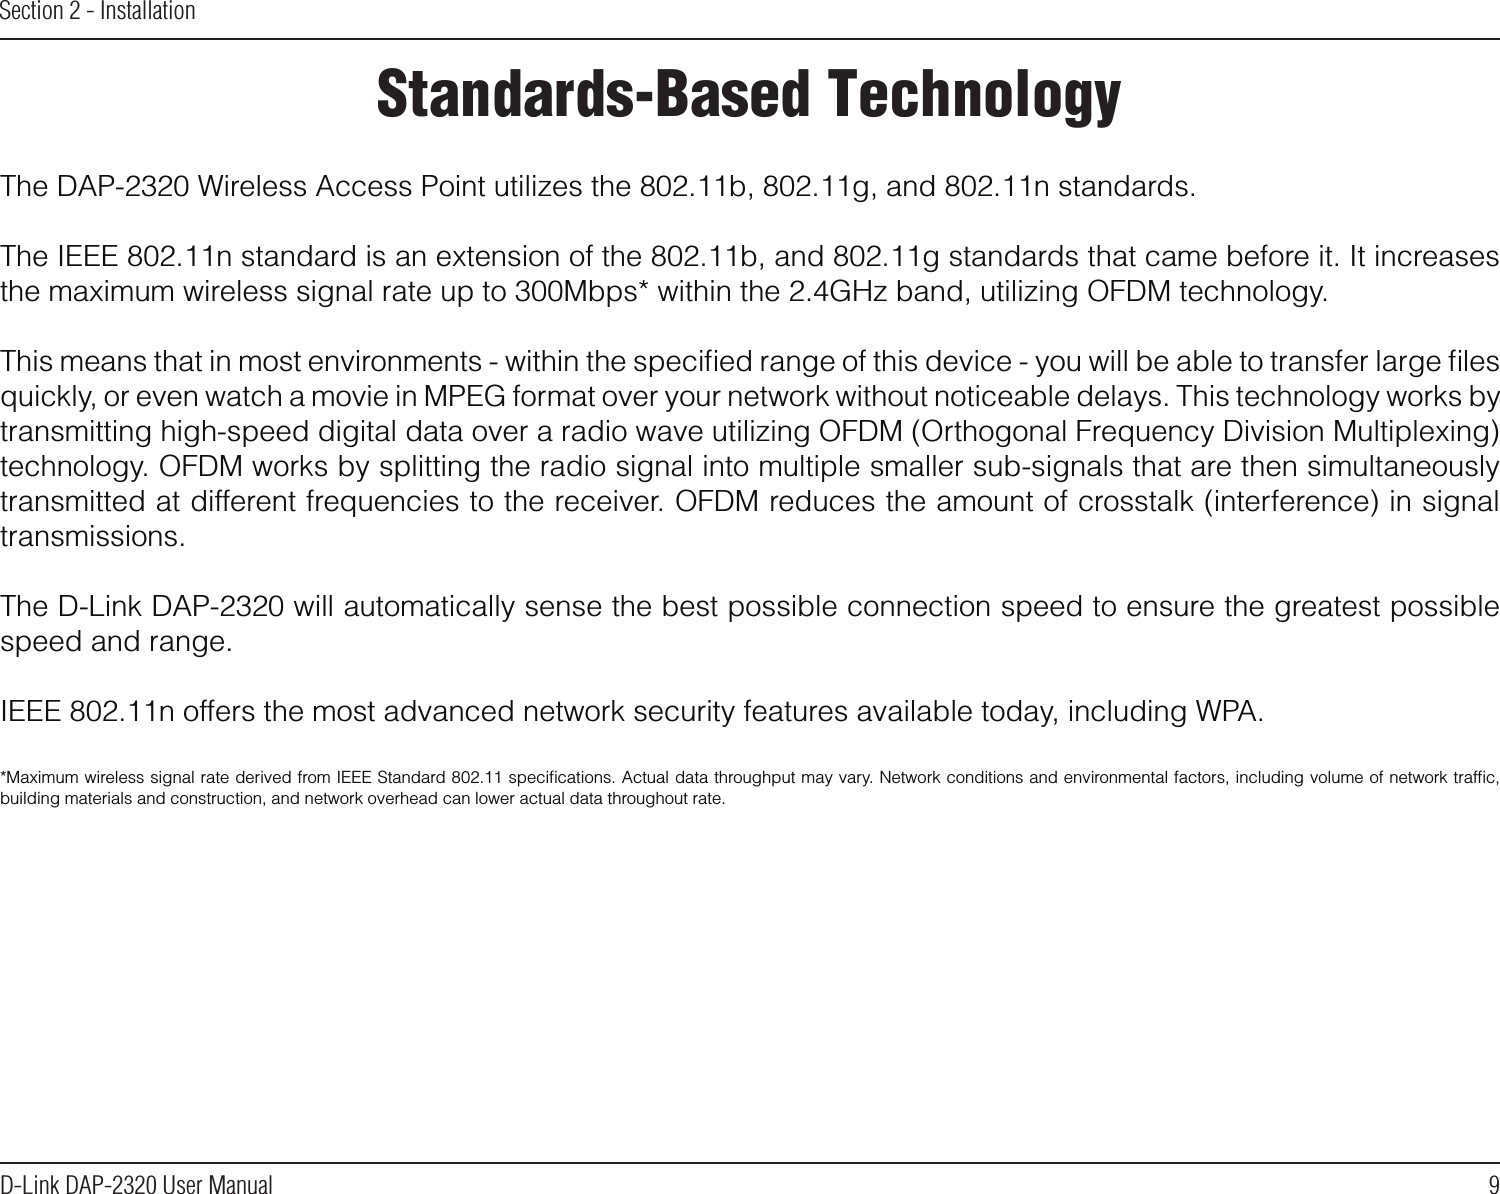 9D-Link DAP-2320 User ManualSection 2 - InstallationStandards-Based TechnologyThe DAP-2320 Wireless Access Point utilizes the 802.11b, 802.11g, and 802.11n standards.The IEEE 802.11n standard is an extension of the 802.11b, and 802.11g standards that came before it. It increases the maximum wireless signal rate up to 300Mbps* within the 2.4GHz band, utilizing OFDM technology.This means that in most environments - within the speciﬁed range of this device - you will be able to transfer large ﬁles quickly, or even watch a movie in MPEG format over your network without noticeable delays. This technology works by transmitting high-speed digital data over a radio wave utilizing OFDM (Orthogonal Frequency Division Multiplexing) technology. OFDM works by splitting the radio signal into multiple smaller sub-signals that are then simultaneously transmitted at different frequencies to the receiver. OFDM reduces the amount of crosstalk (interference) in signal transmissions. The D-Link DAP-2320 will automatically sense the best possible connection speed to ensure the greatest possible speed and range.IEEE 802.11n offers the most advanced network security features available today, including WPA.*Maximum wireless signal rate derived from IEEE Standard 802.11 speciﬁcations. Actual data throughput may vary. Network conditions and environmental factors, including volume of network trafﬁc, building materials and construction, and network overhead can lower actual data throughout rate.